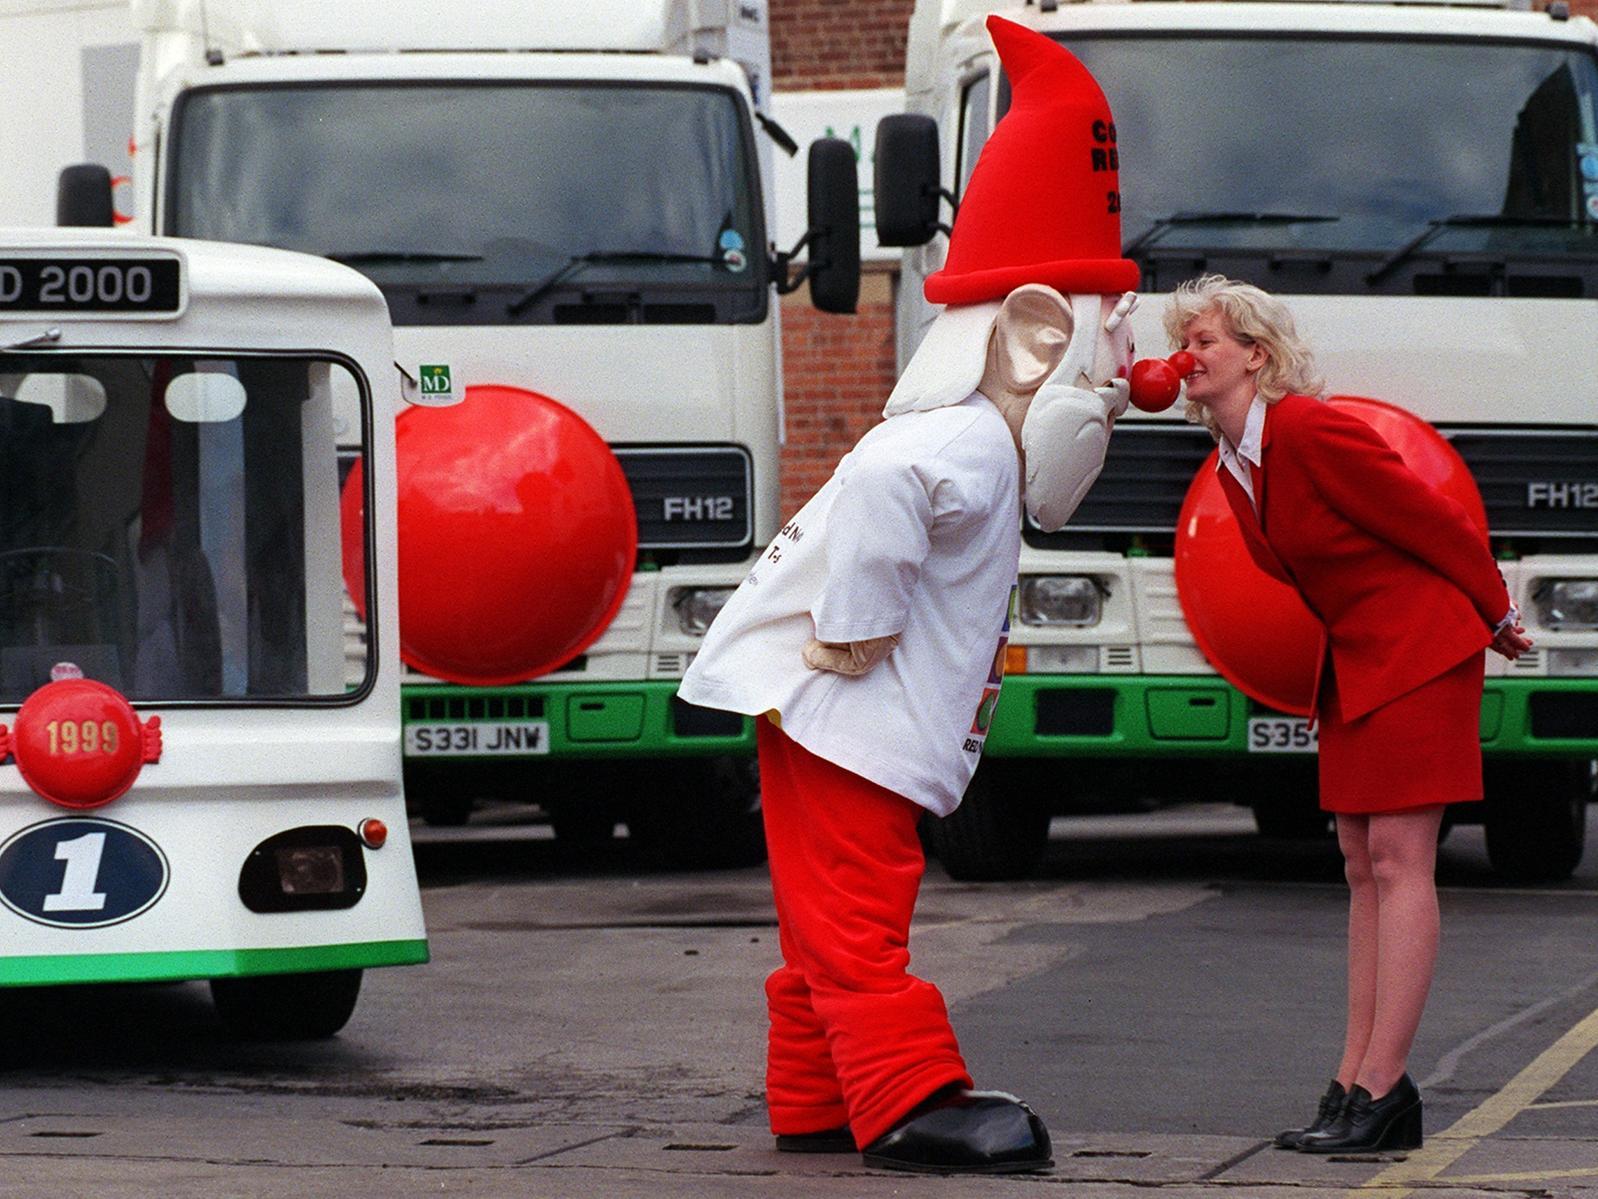 Mags McAvoy, of M.D.Foods in Leeds, greets the official Comic Relief Millennium Gnome with an Eskimo kiss on his arrival in Leeds to celebrate the delivery of 5,000 red noses for their employees.